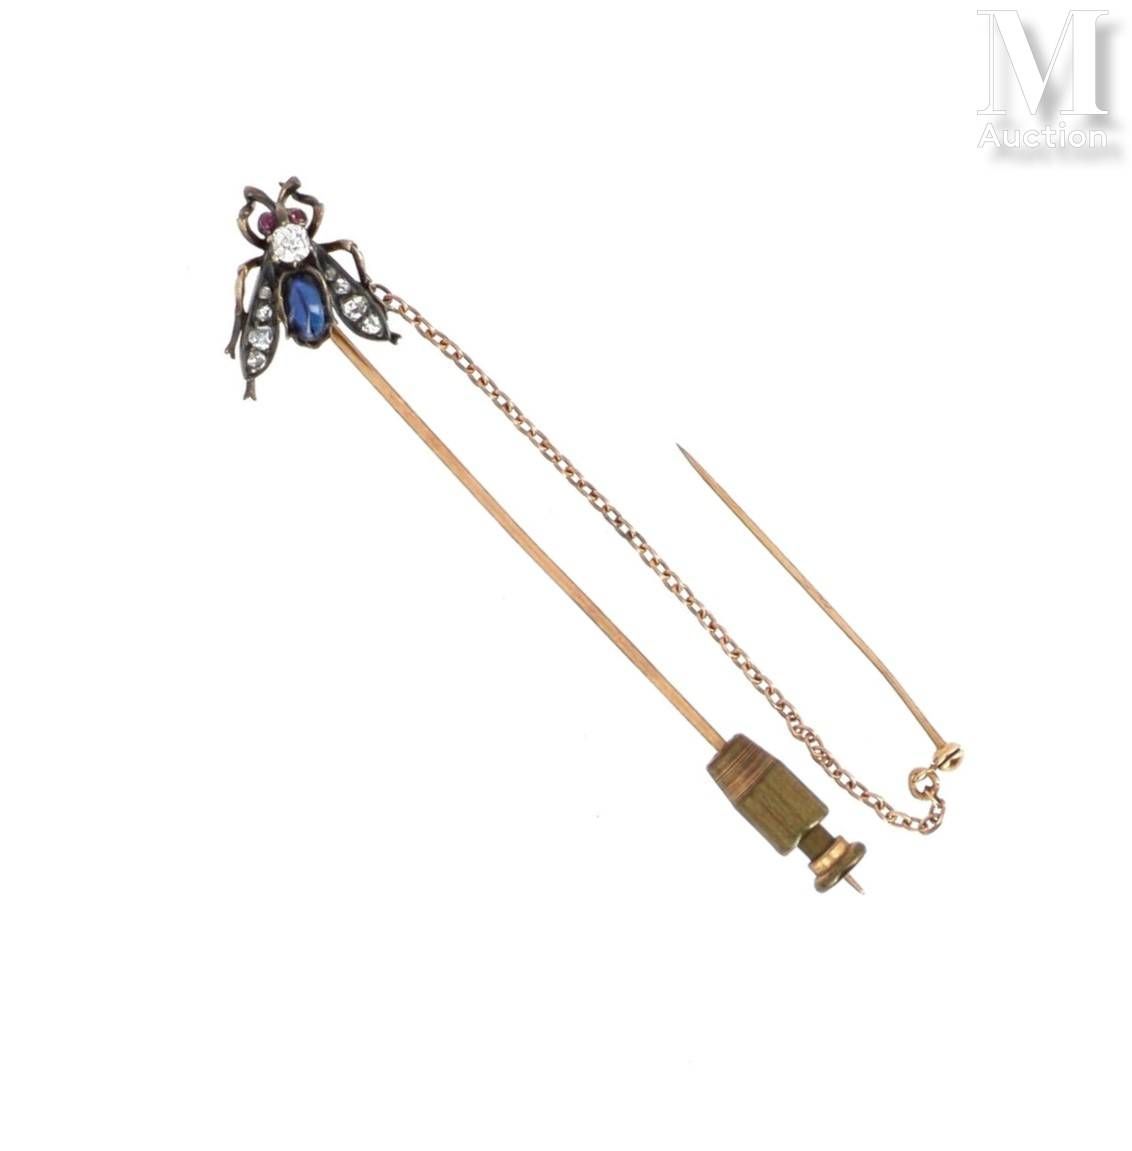 Epingle mouche Tie pin in 18 K yellow gold (750 °/°°) decorated with a silver fl&hellip;